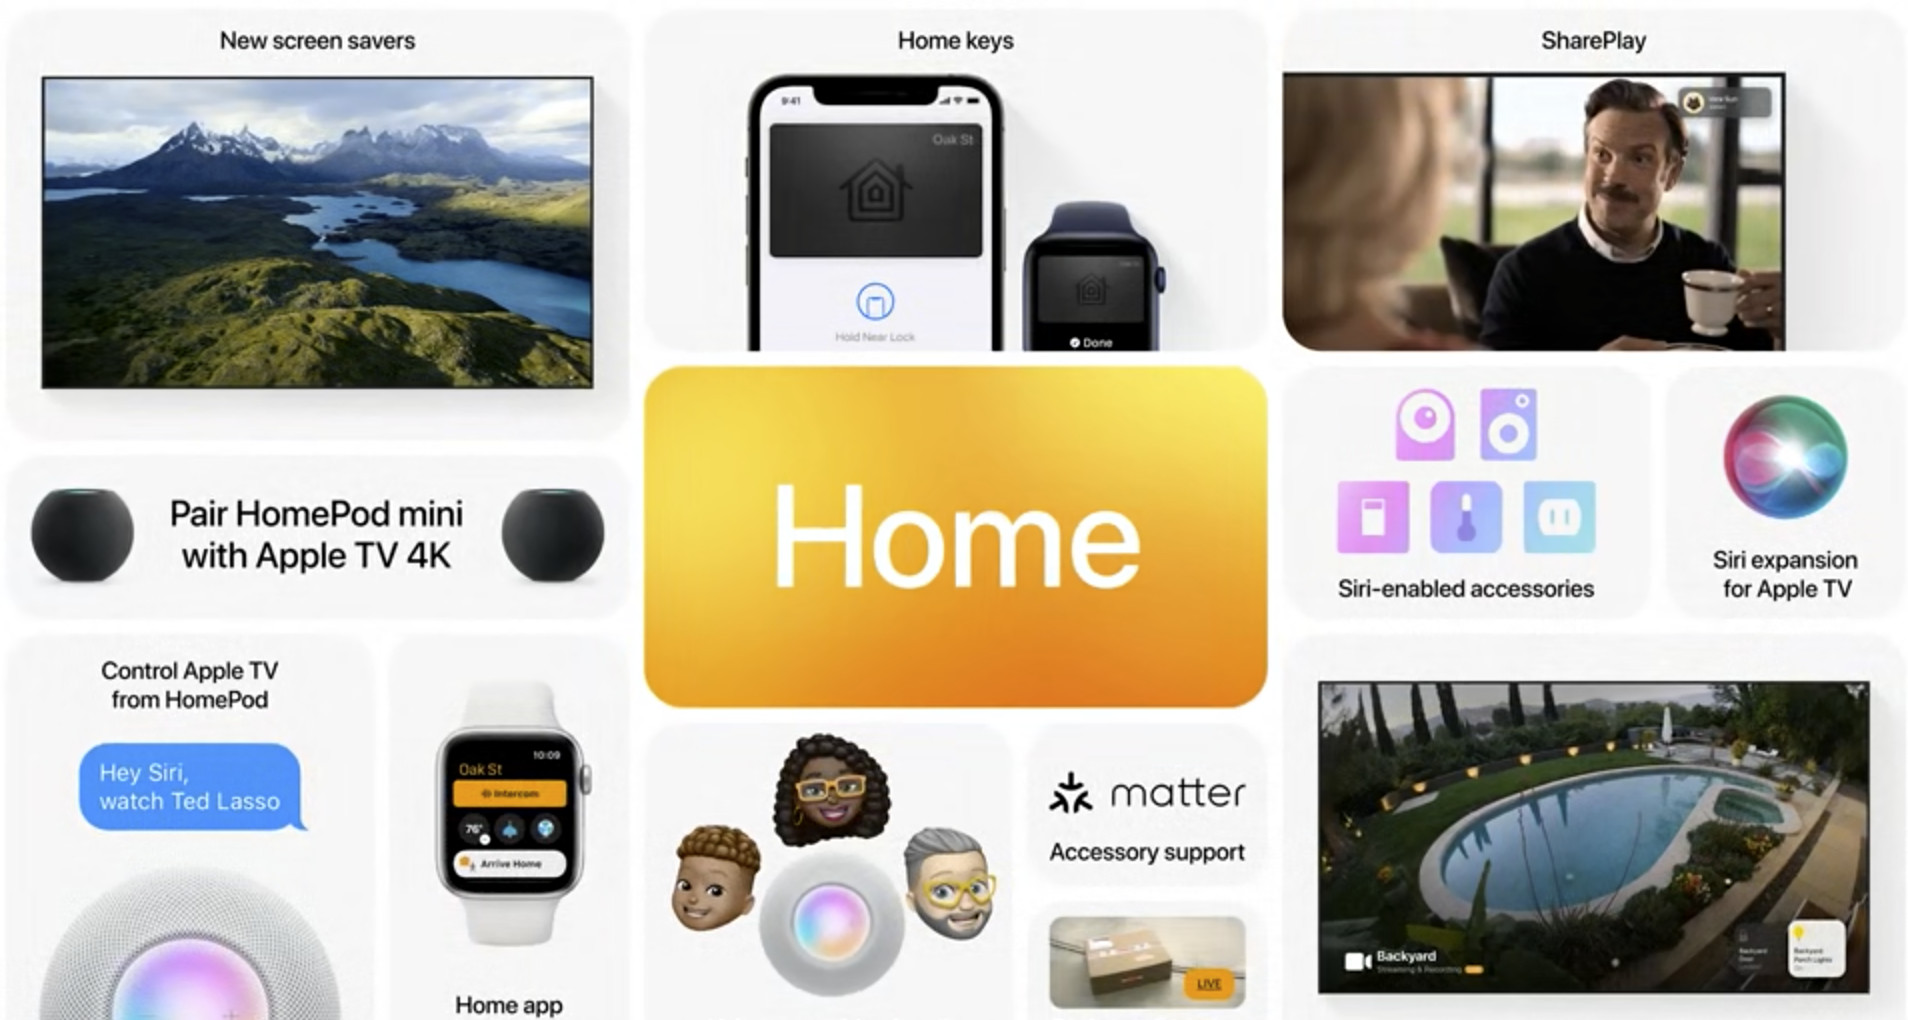 iOS 17: These are the new HomeKit and Matter features